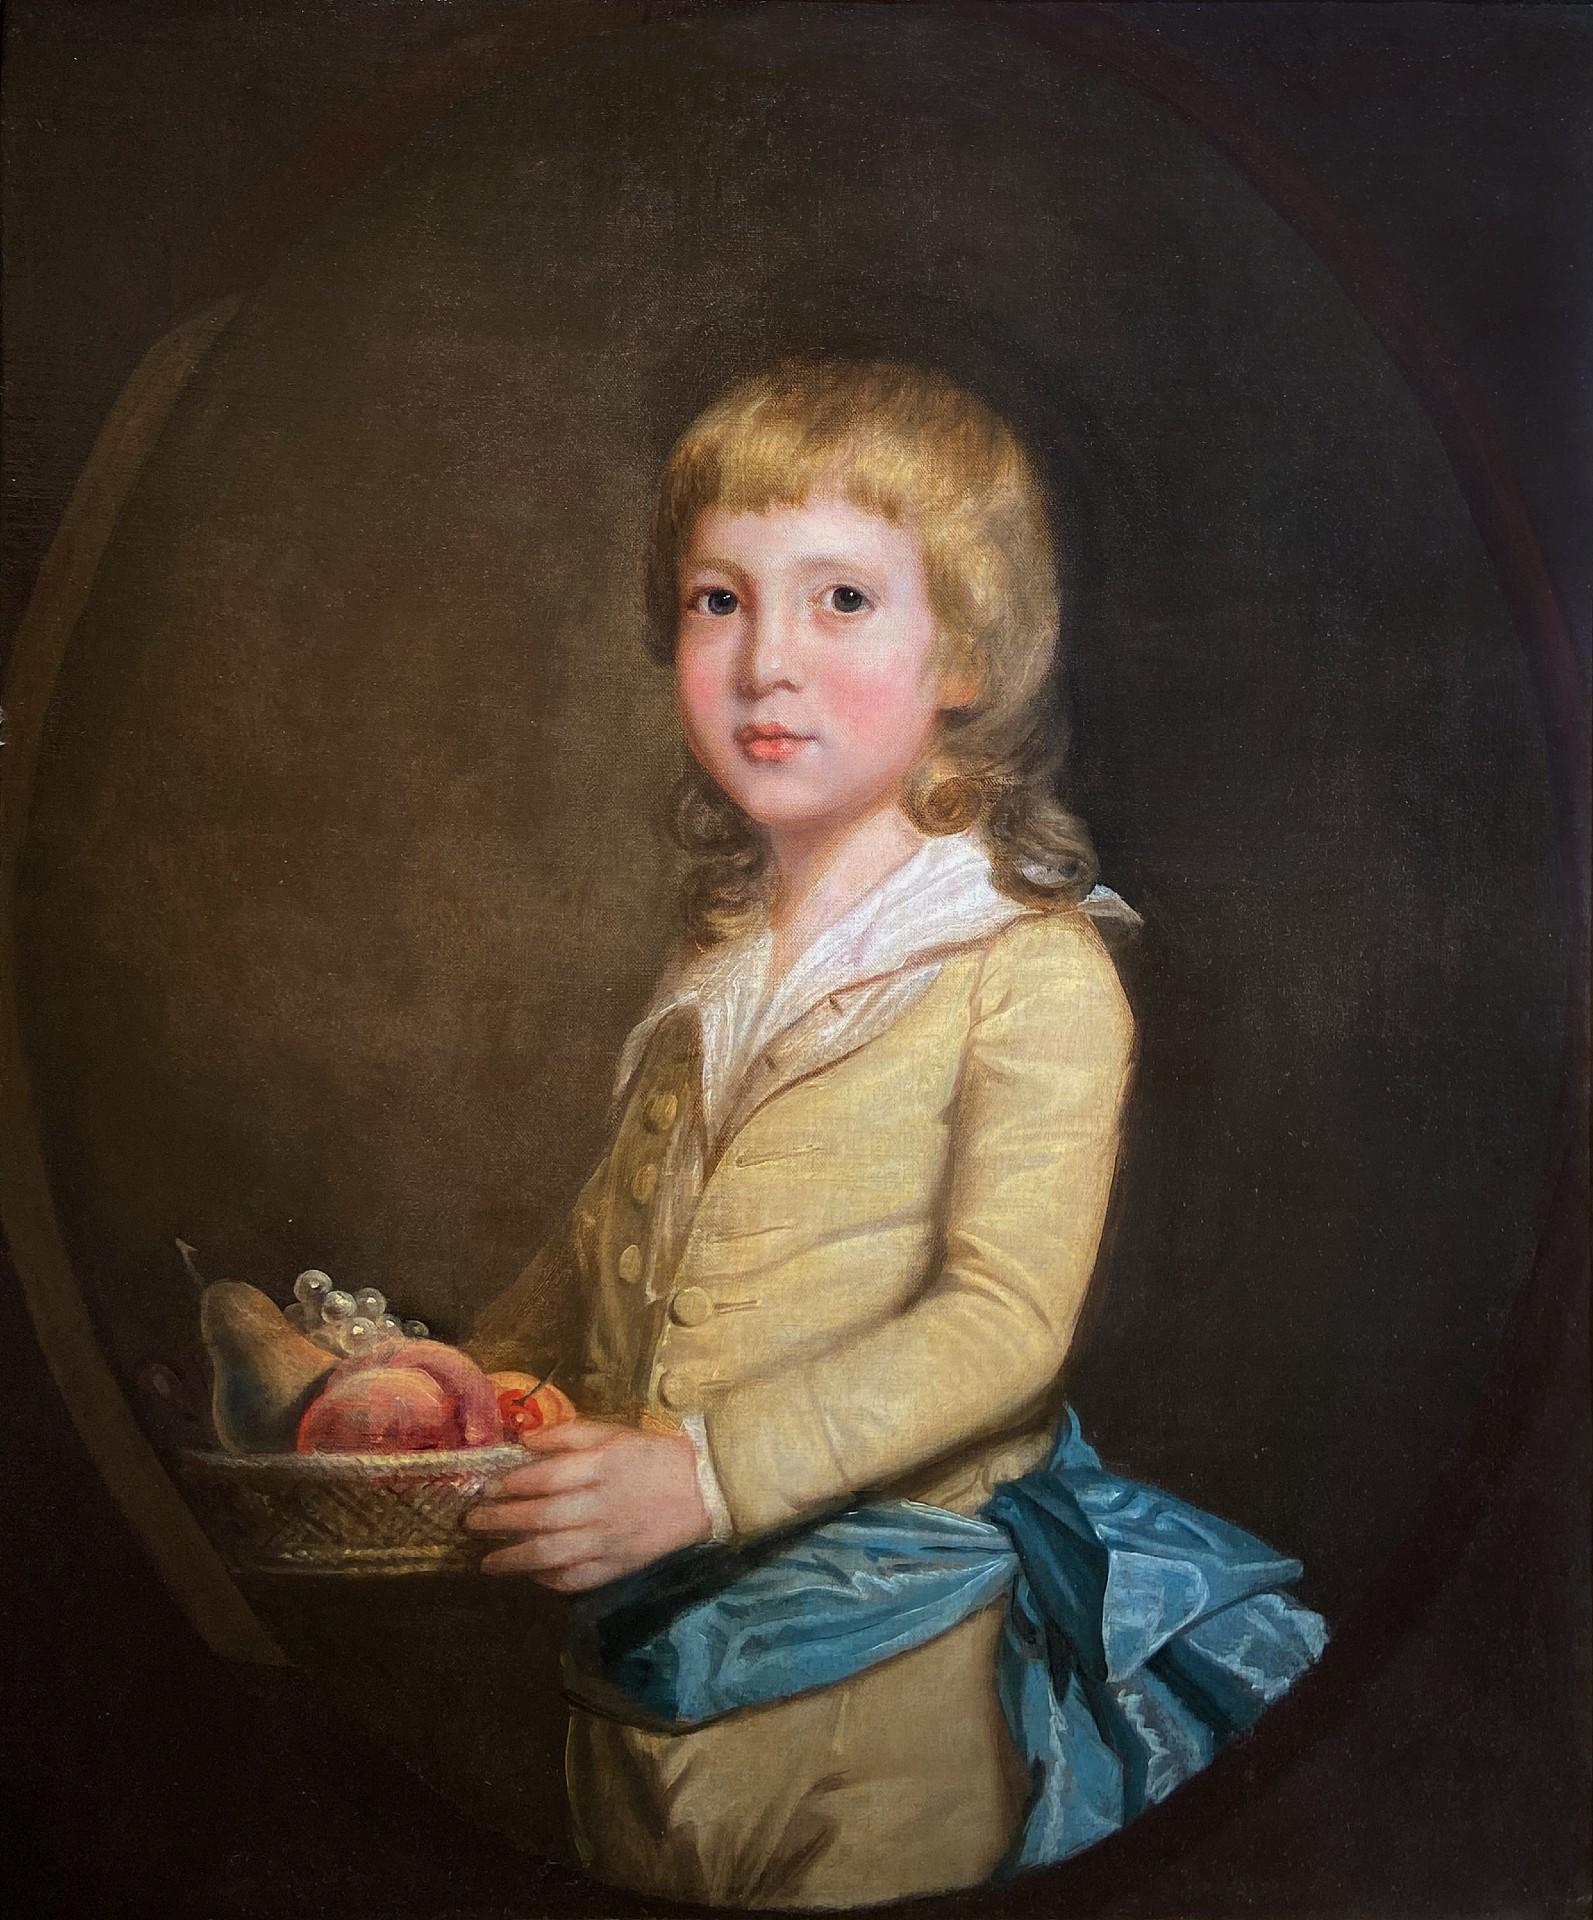 Sir William Beechey Portrait Painting - Portrait of a Young Boy Carrying a Fruit Basket, 18th Century Oil on Canvas